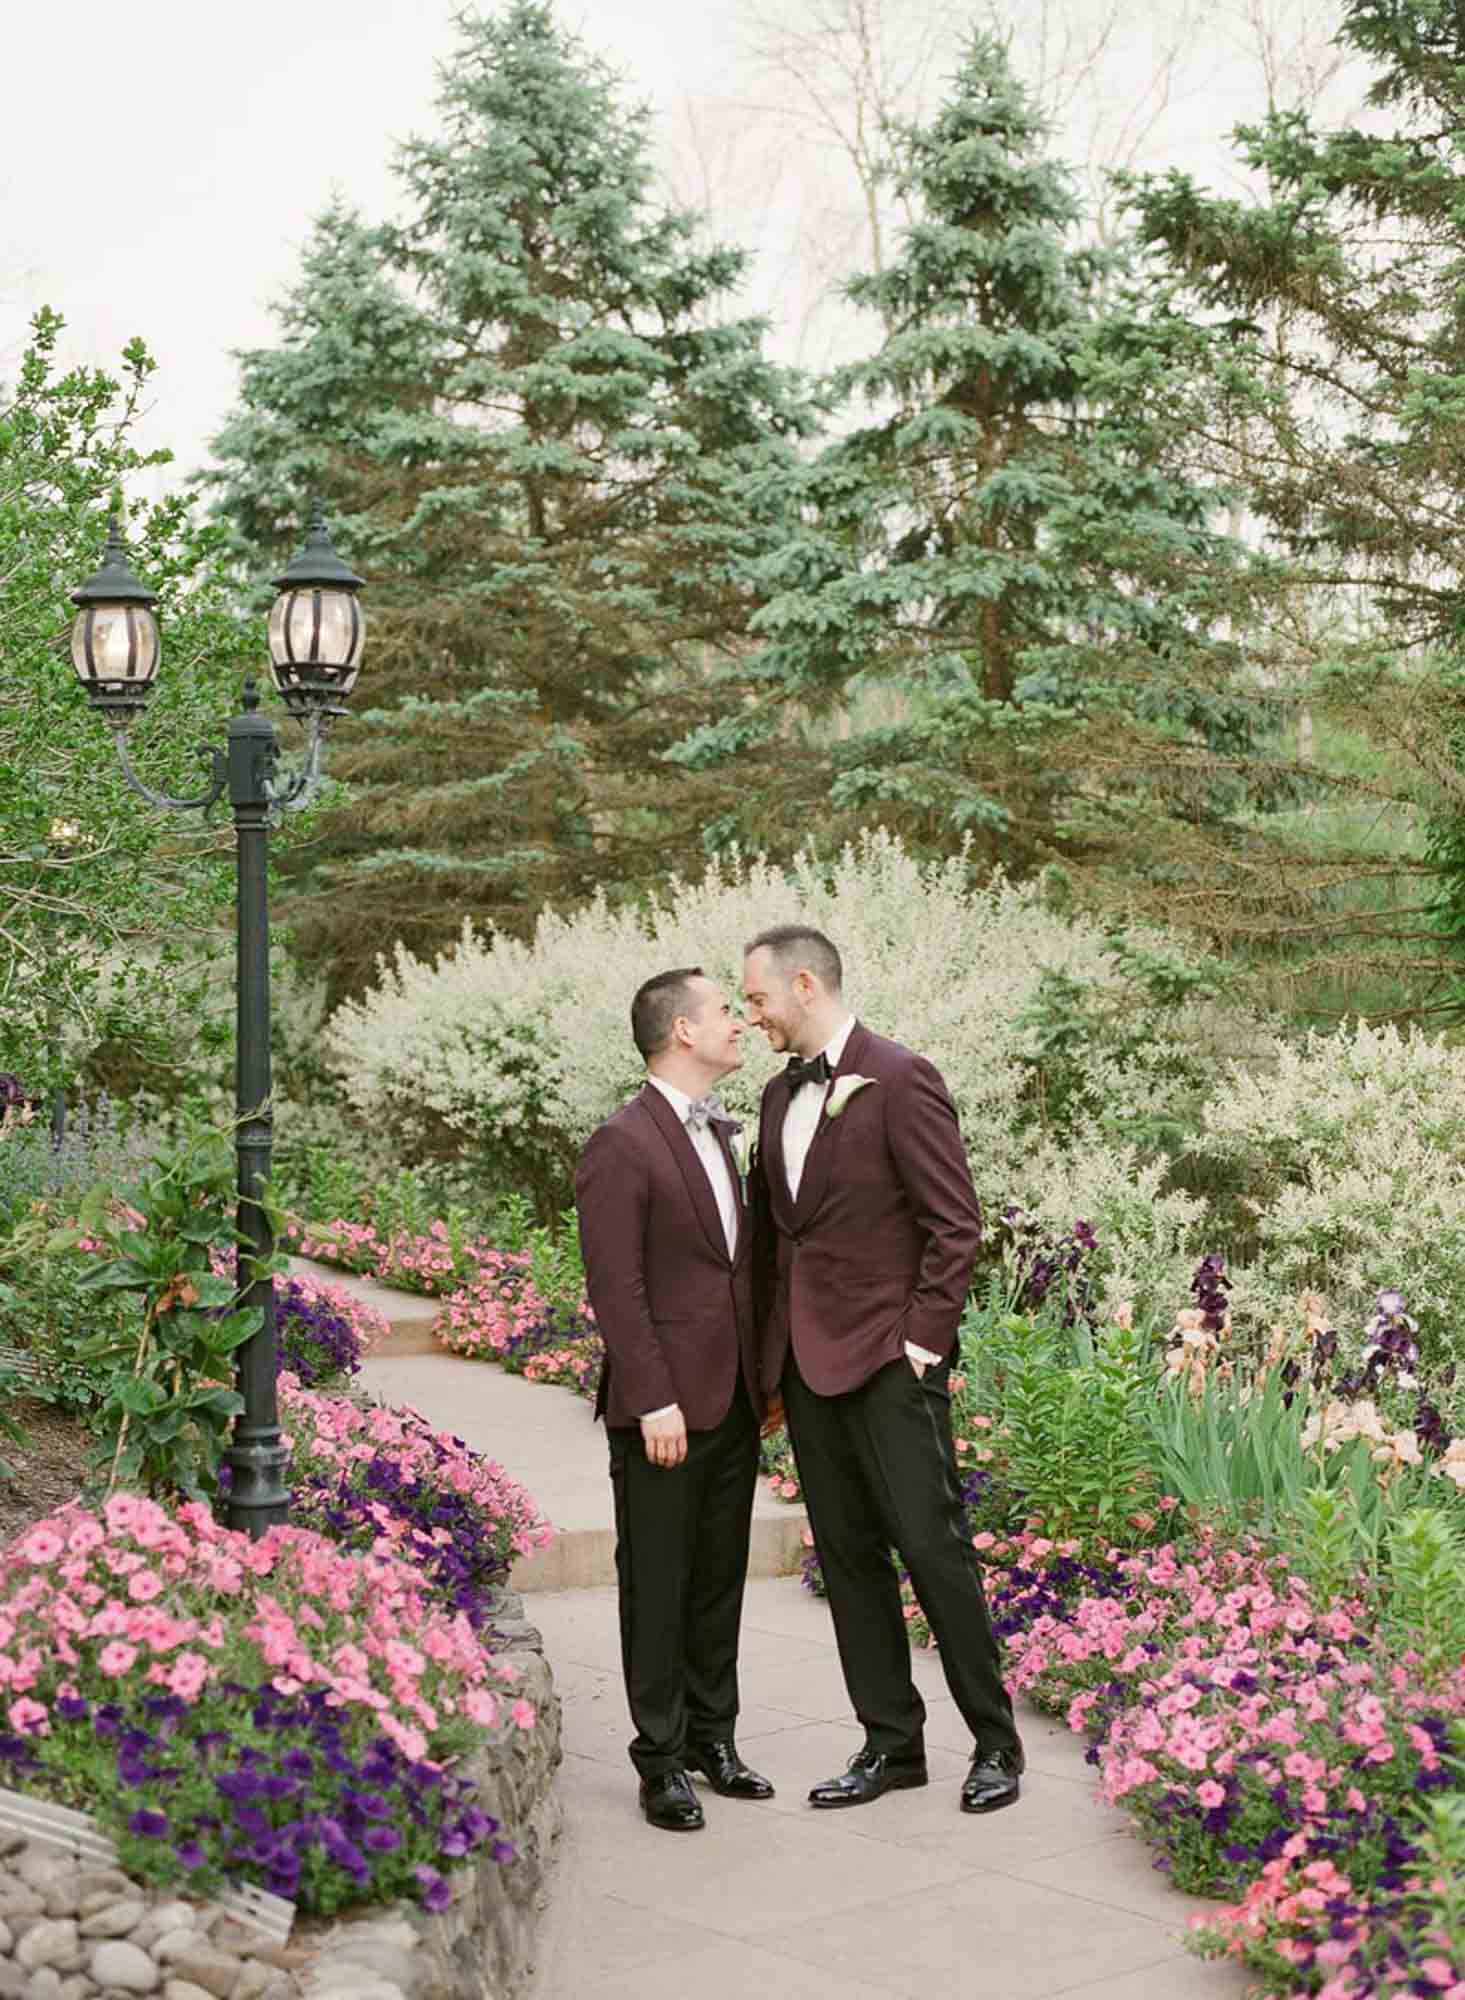 men in love grooms in purple jackets holding hands LGBTQ+ wedding featured on Equally Wed magazine with two grooms Brian + Brett: Hudson Valley garden wedding with shades of purple Upasana Mainali Photography outdoor wedding ceremony